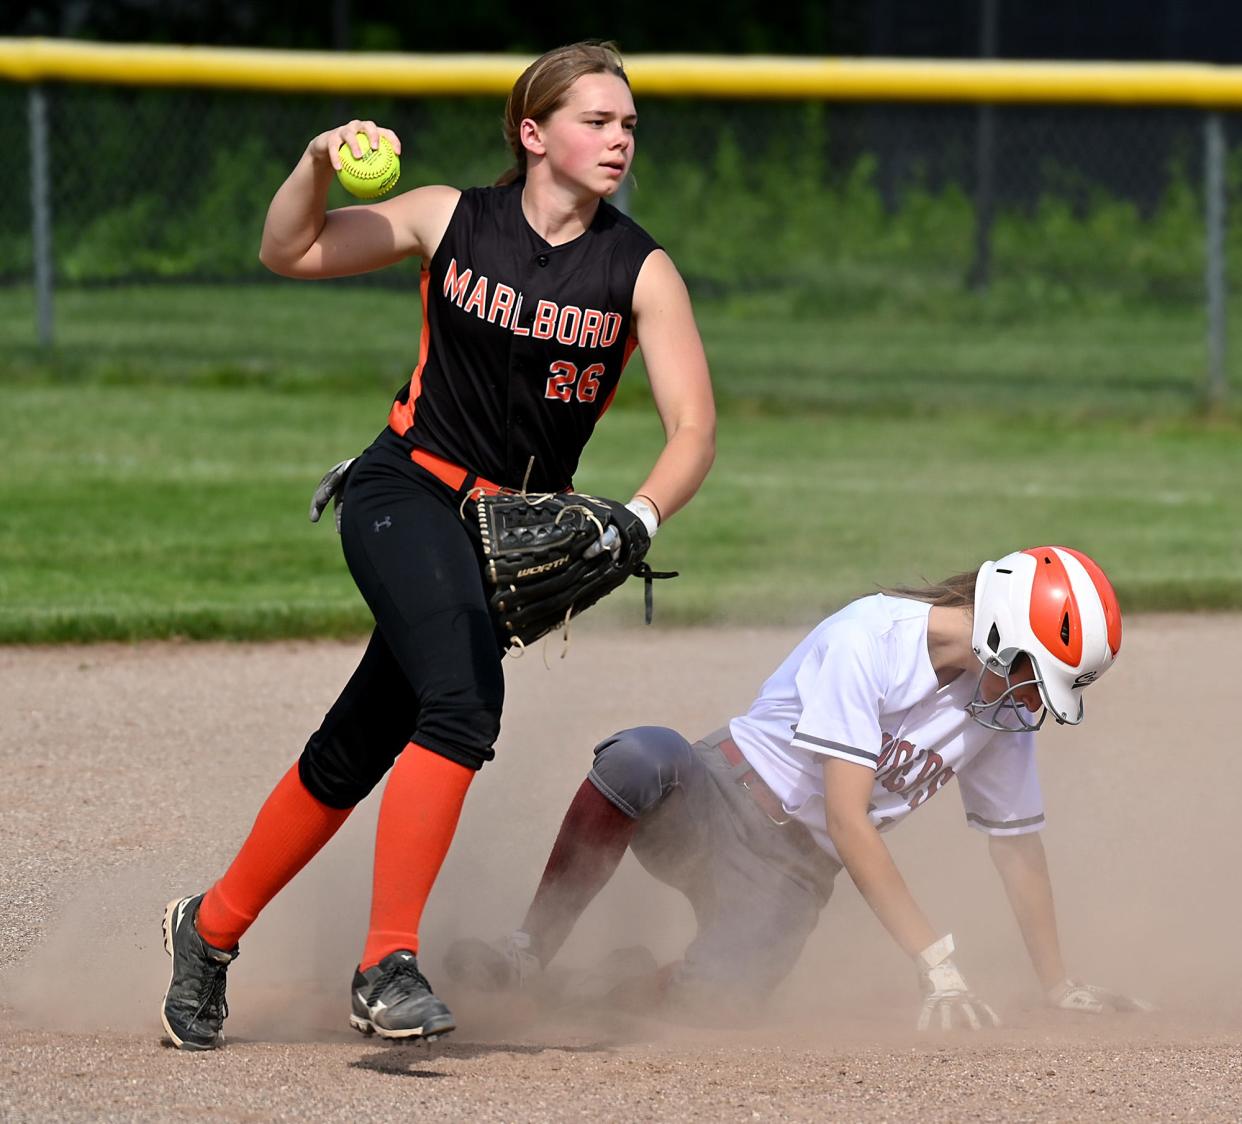 Marlborough shortstop Catherine Seay holds up the ball for the umpire after forcing out a Marlborough baserunner Wednesday at Westborough High School, June 2, 2021.  